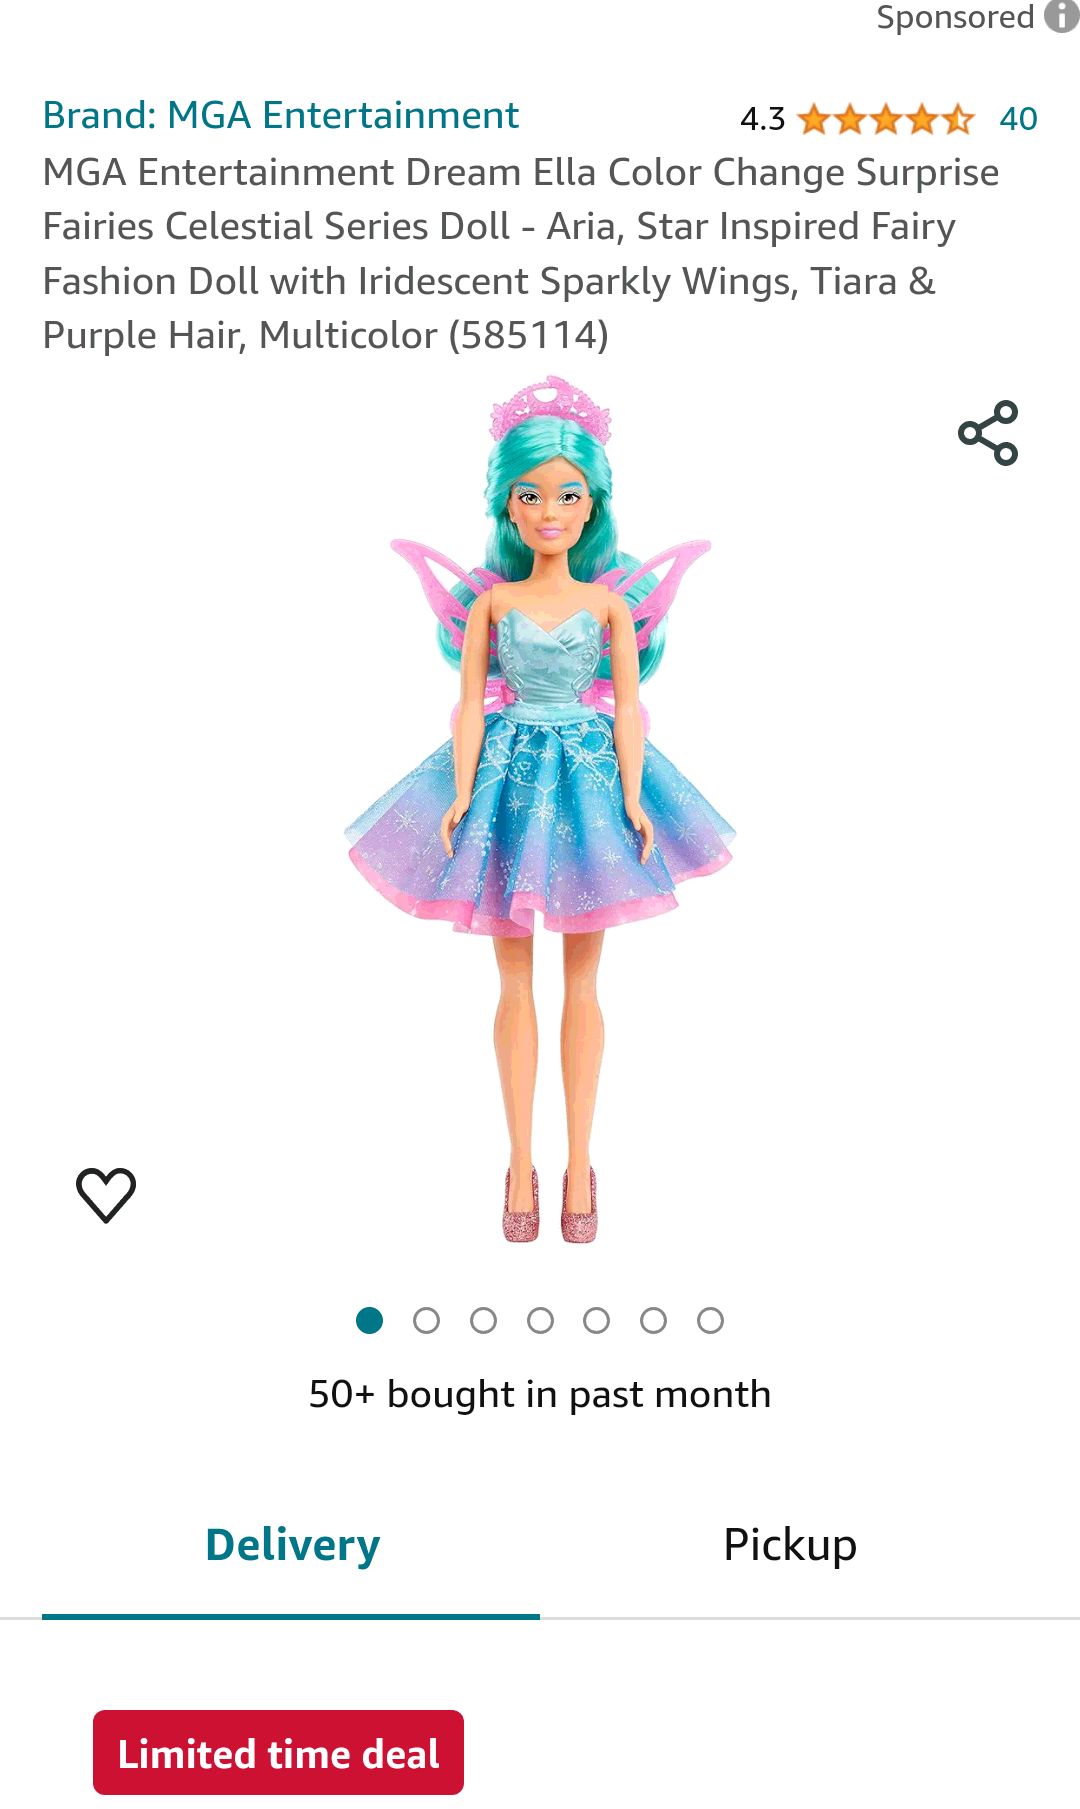 MGA Entertainment Dream Ella Color Change Surprise Fairies Celestial Series Doll - Aria, Star Inspired Fairy Fashion Doll with Iridescent Sparkly Wings, Tiara & Purple Hair, Multicolor (585114) : Toys